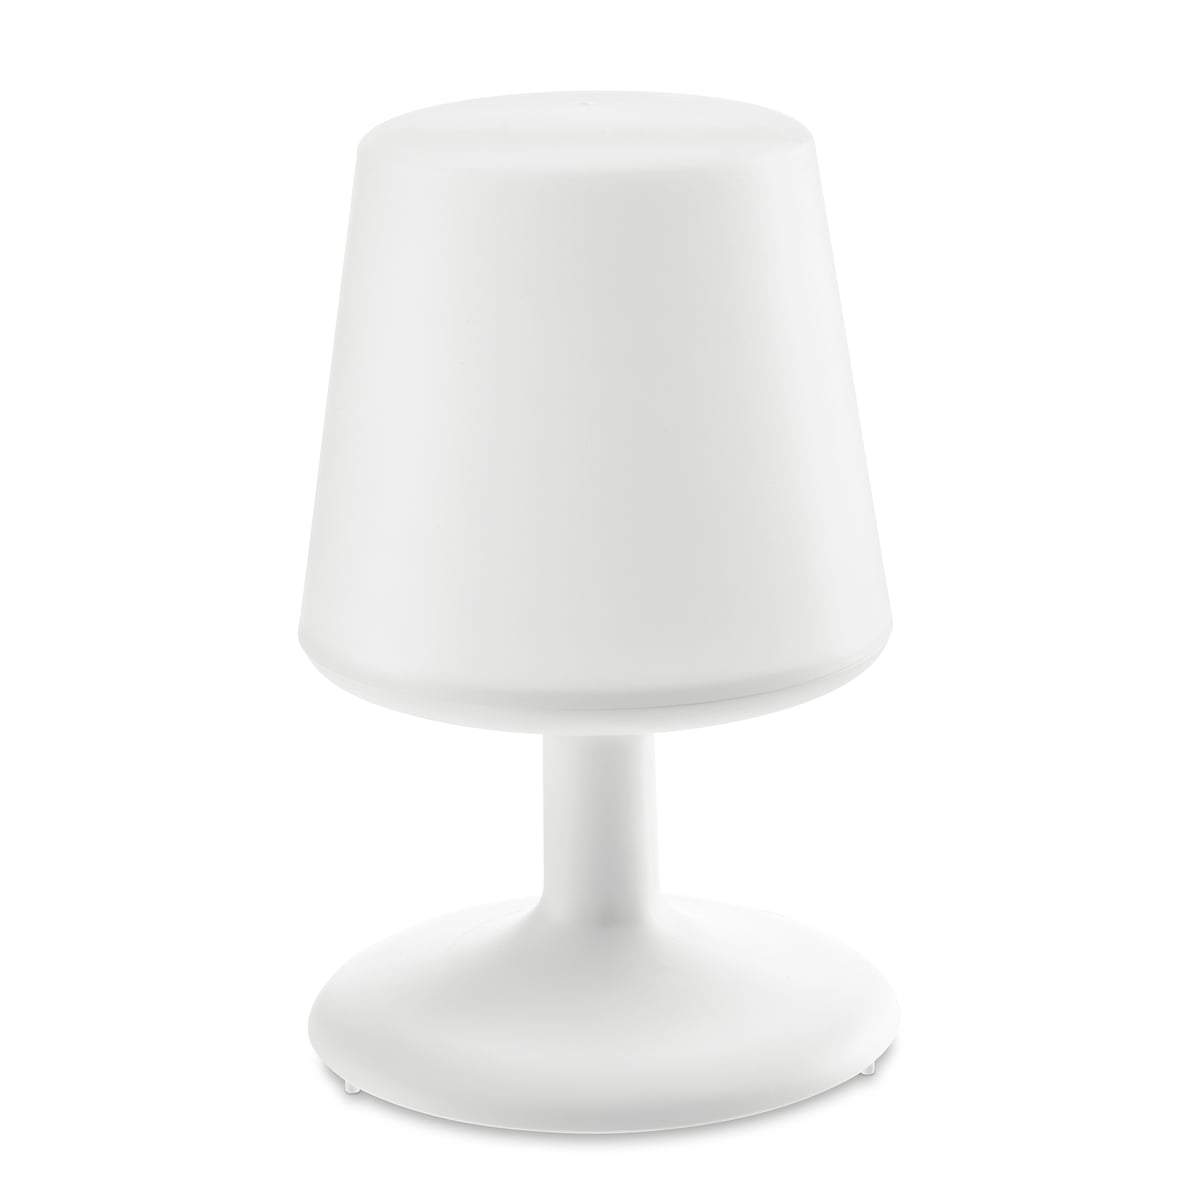 Light To Go Battery Powered Table Lamp, Are There Battery Powered Table Lamps